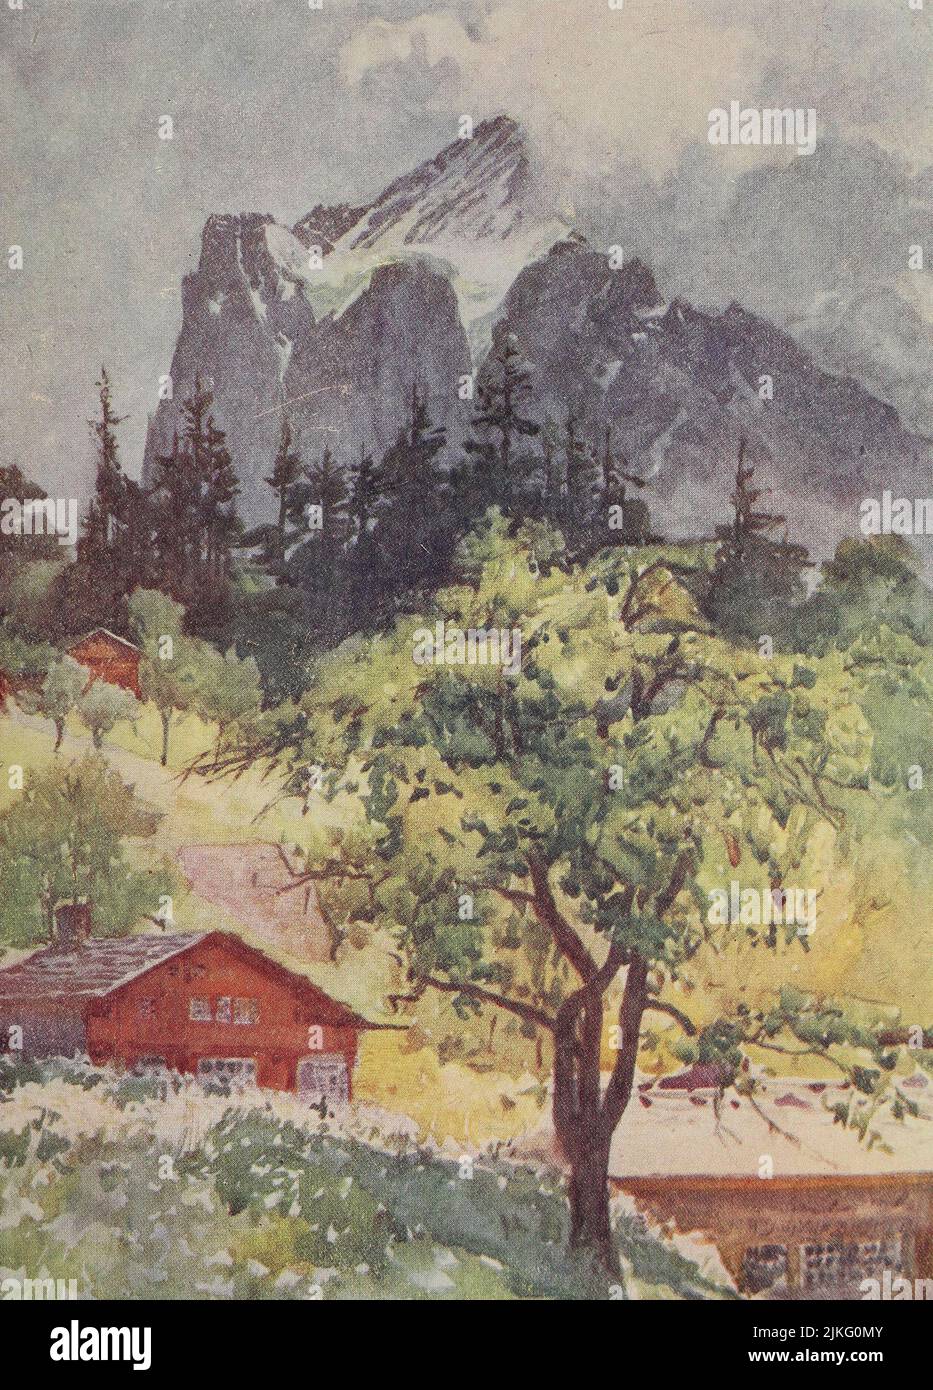 The Wetterhorn Grindelwald Chalets, flower-clad slopes and sunlit trees Painted by A. D. McCormick from the book ' The Alps ' by Sir William Martin Conway,  Publication date 1904 Publisher London : Adam and Charles Black Arthur David McCormick FRGS (Coleraine 14 October 1860 – 1943) was a notable British illustrator and painter of landscapes, historical scenes, naval subjects, and genre scenes. Stock Photo